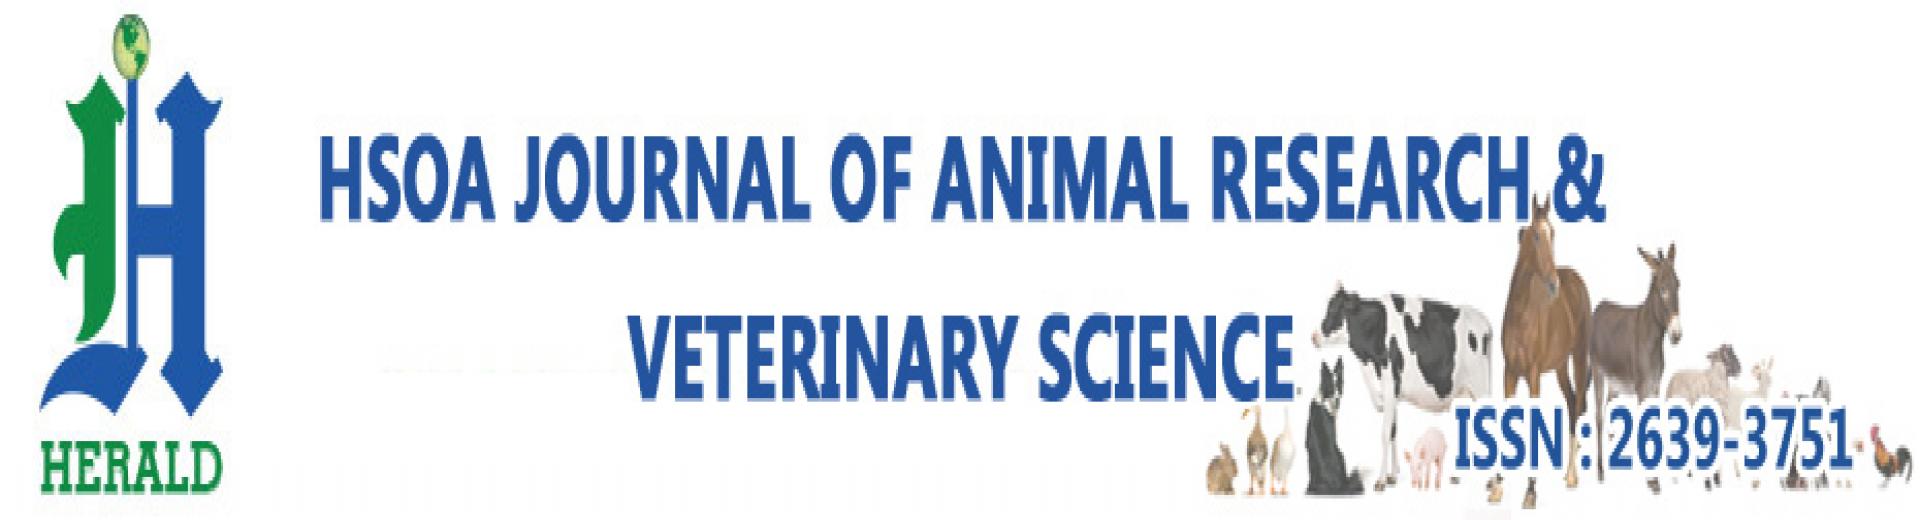 Journal of Animal Research & Veterinary Science